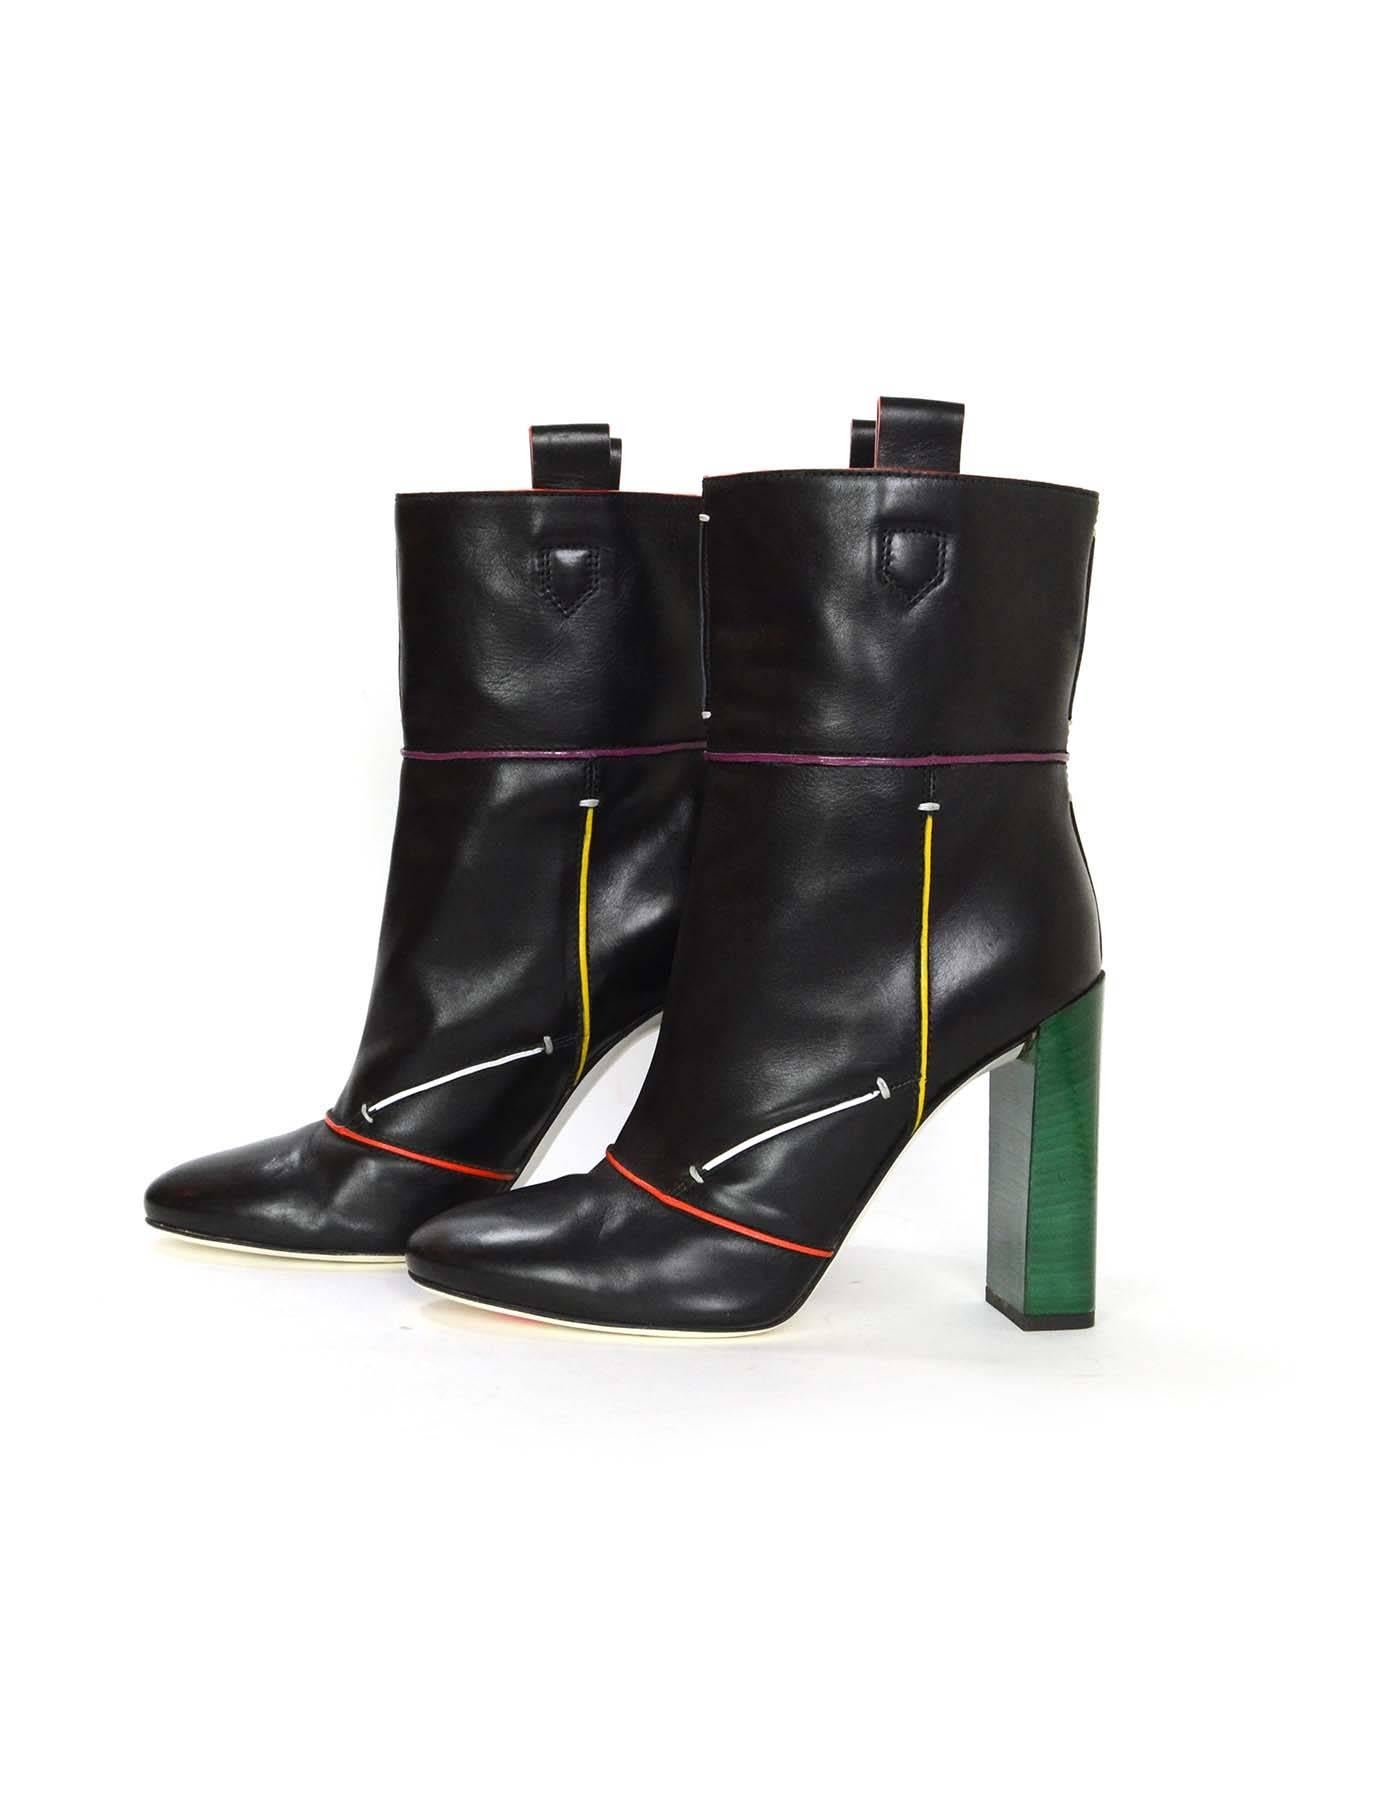 Fendi Black Leather Subway Boots 
Features multi-colored piping throughout with a green stacked heel
Made In: Italy
Color: Black, red, purple, yellow, white and green
Materials: Leather
Closure/Opening: Pull on
Sole Stamp: Fendi Made In Italy